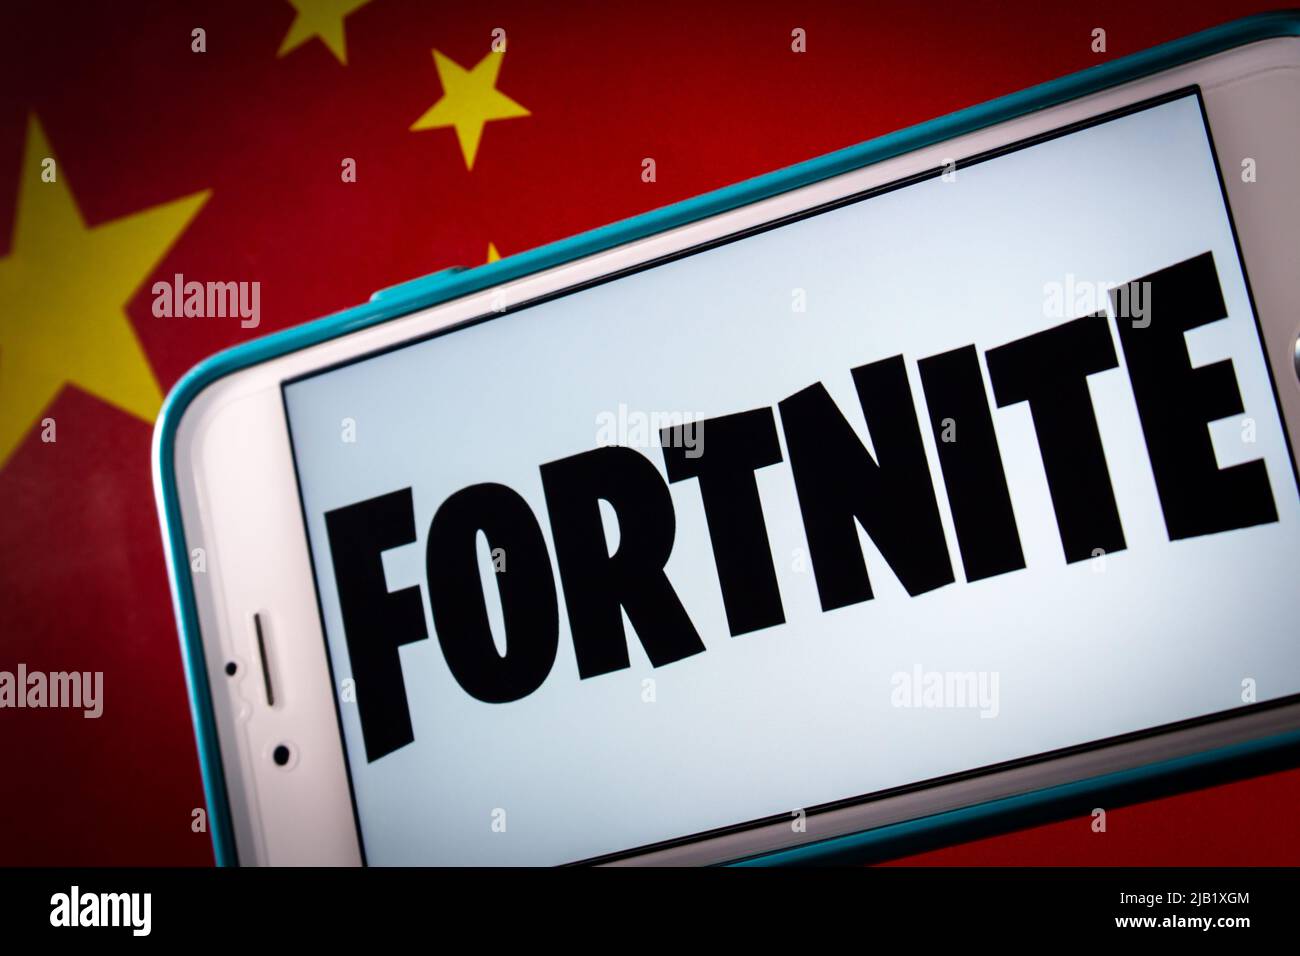 Kumamoto, JAPAN - Nov 9 2021 : Conceptual closeup logo of Fortnite, online video game developed by Epic Games, on iPhone on Chinese flag in dark mood Stock Photo